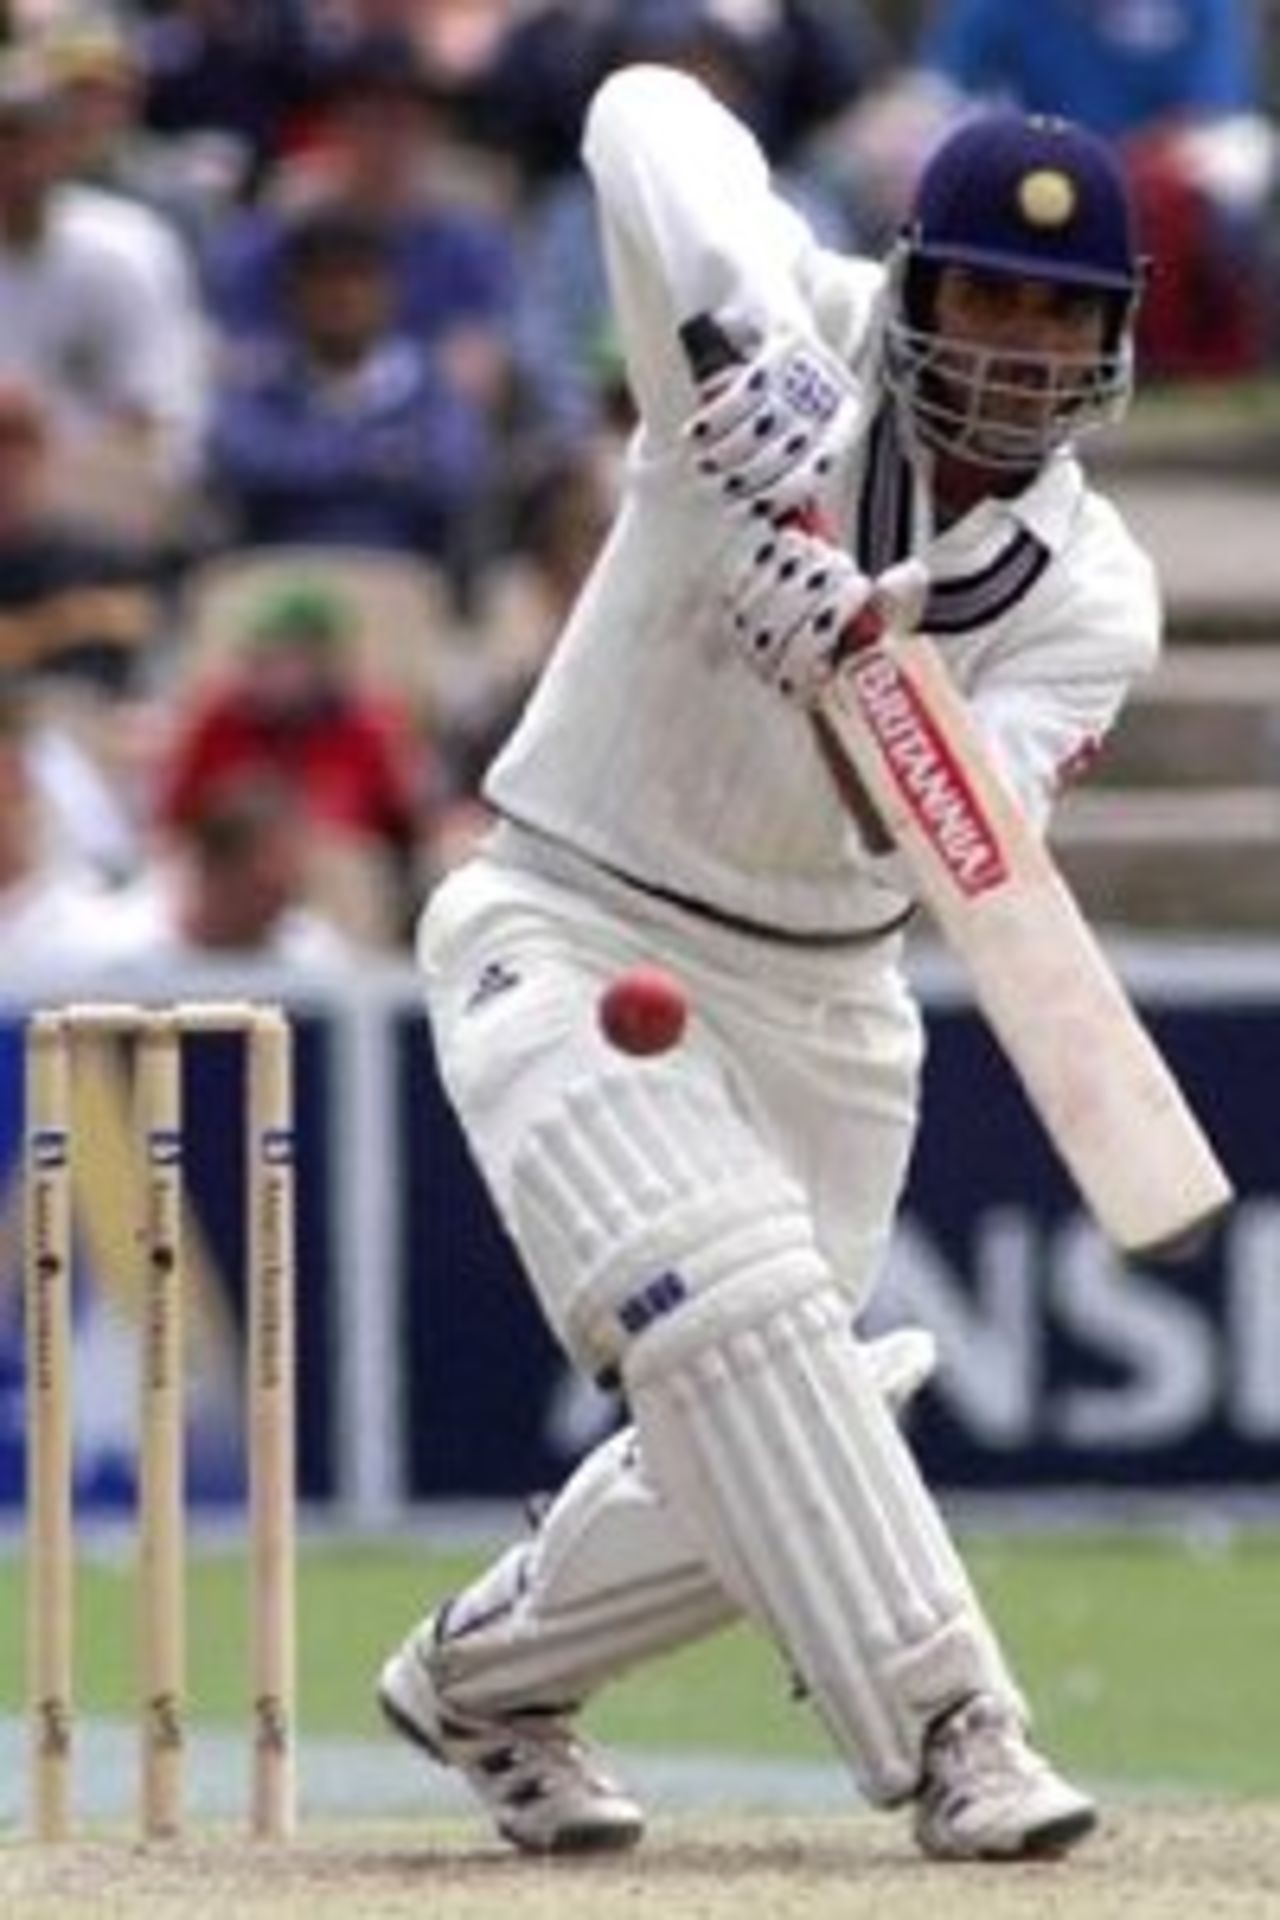 12 Dec 1999: Saurav Ganguly of India on the attack, on three of the first test between Australia and India, at the Adelaide Oval, Adelaide, Australia.